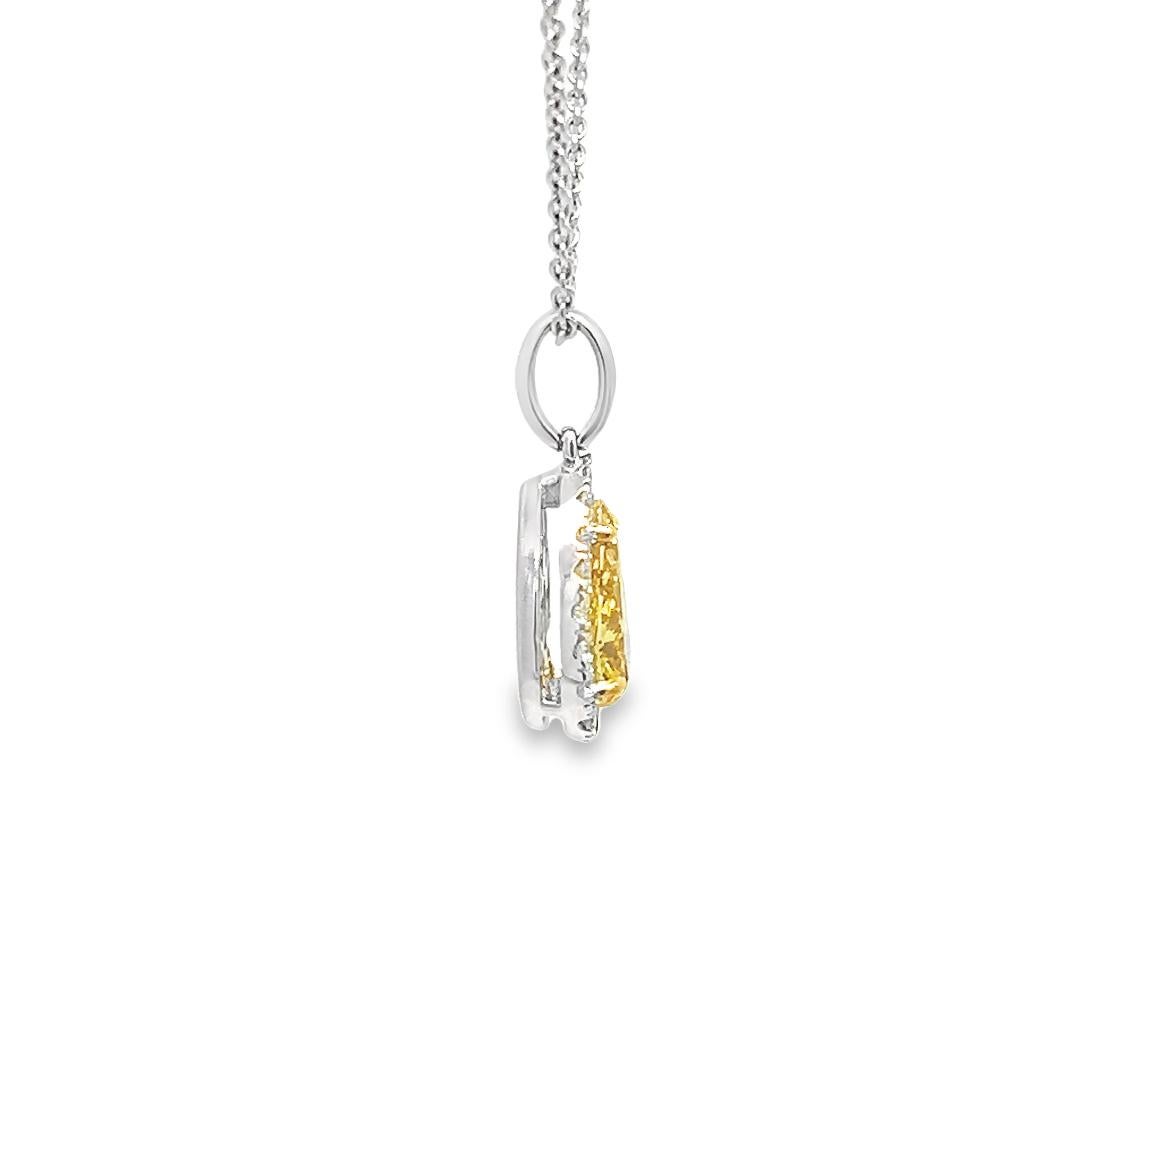 Aesthetic Movement 1.09CT Total weight Fancy Vivid Orangy Yellow Pendant Necklace, set in 18kyw GIA For Sale